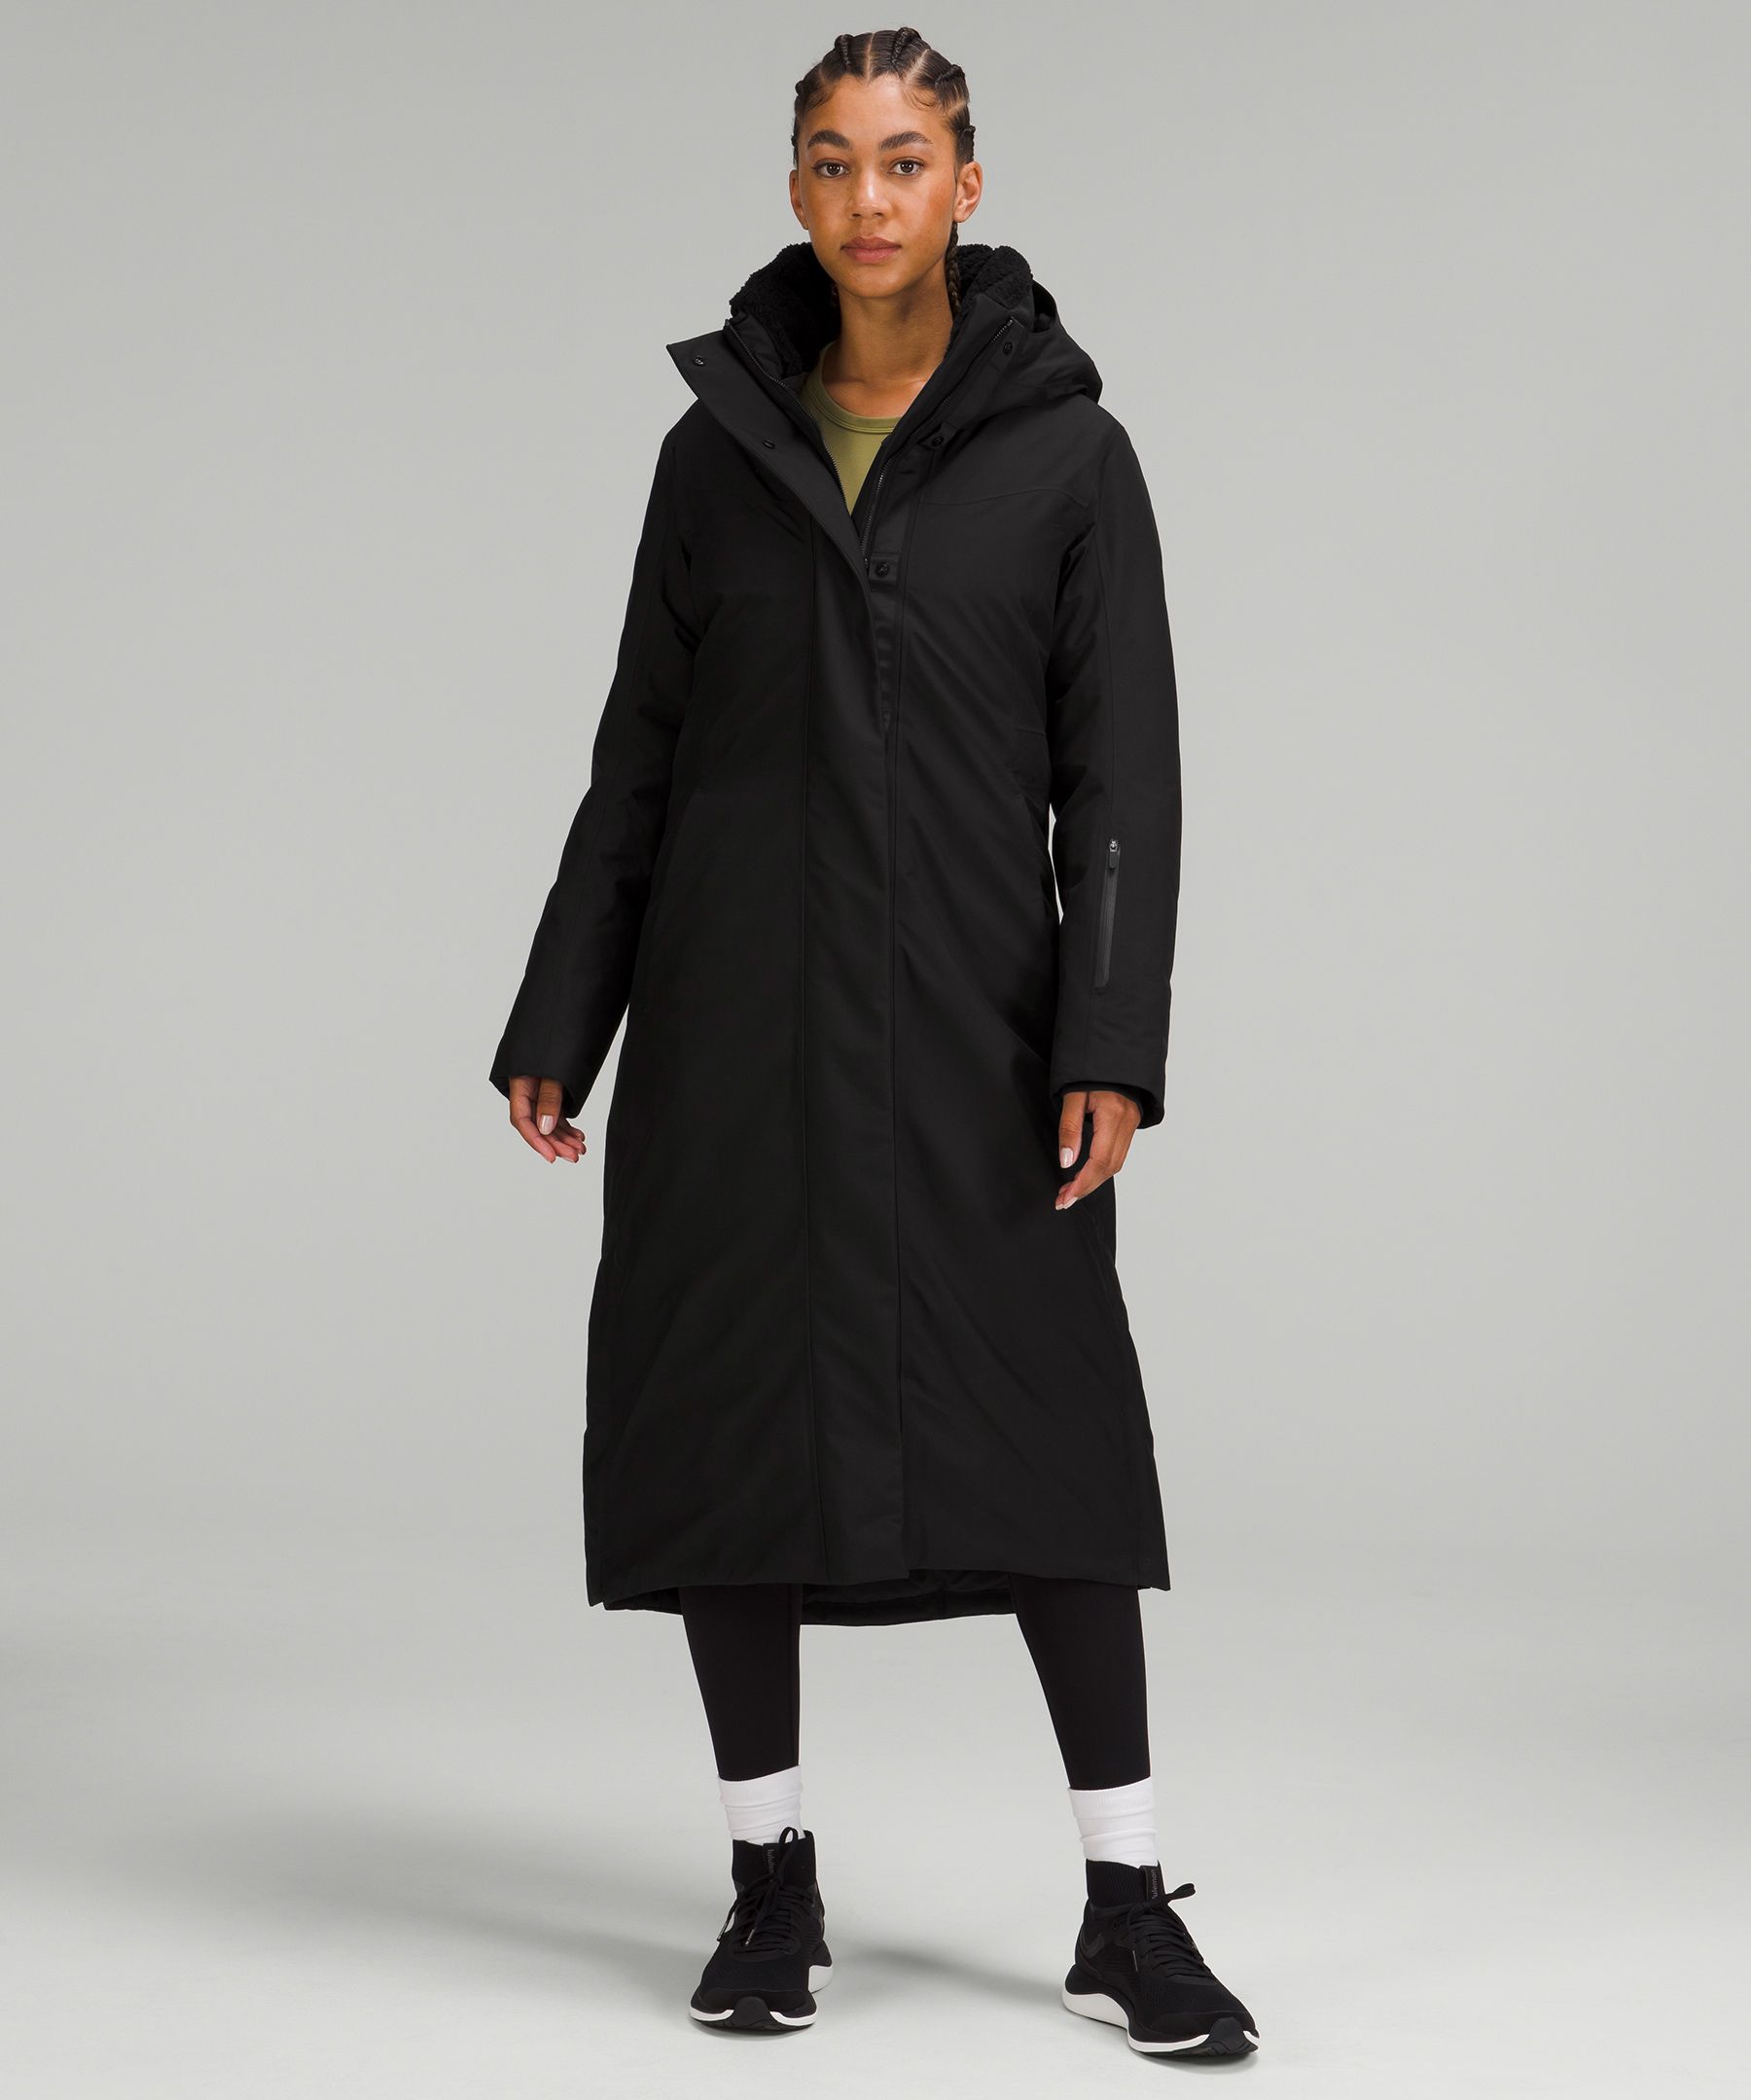 Lululemon Coats and Jackets Cheap Price - Black Winter Warrior 3-in-1 Parka  Womens